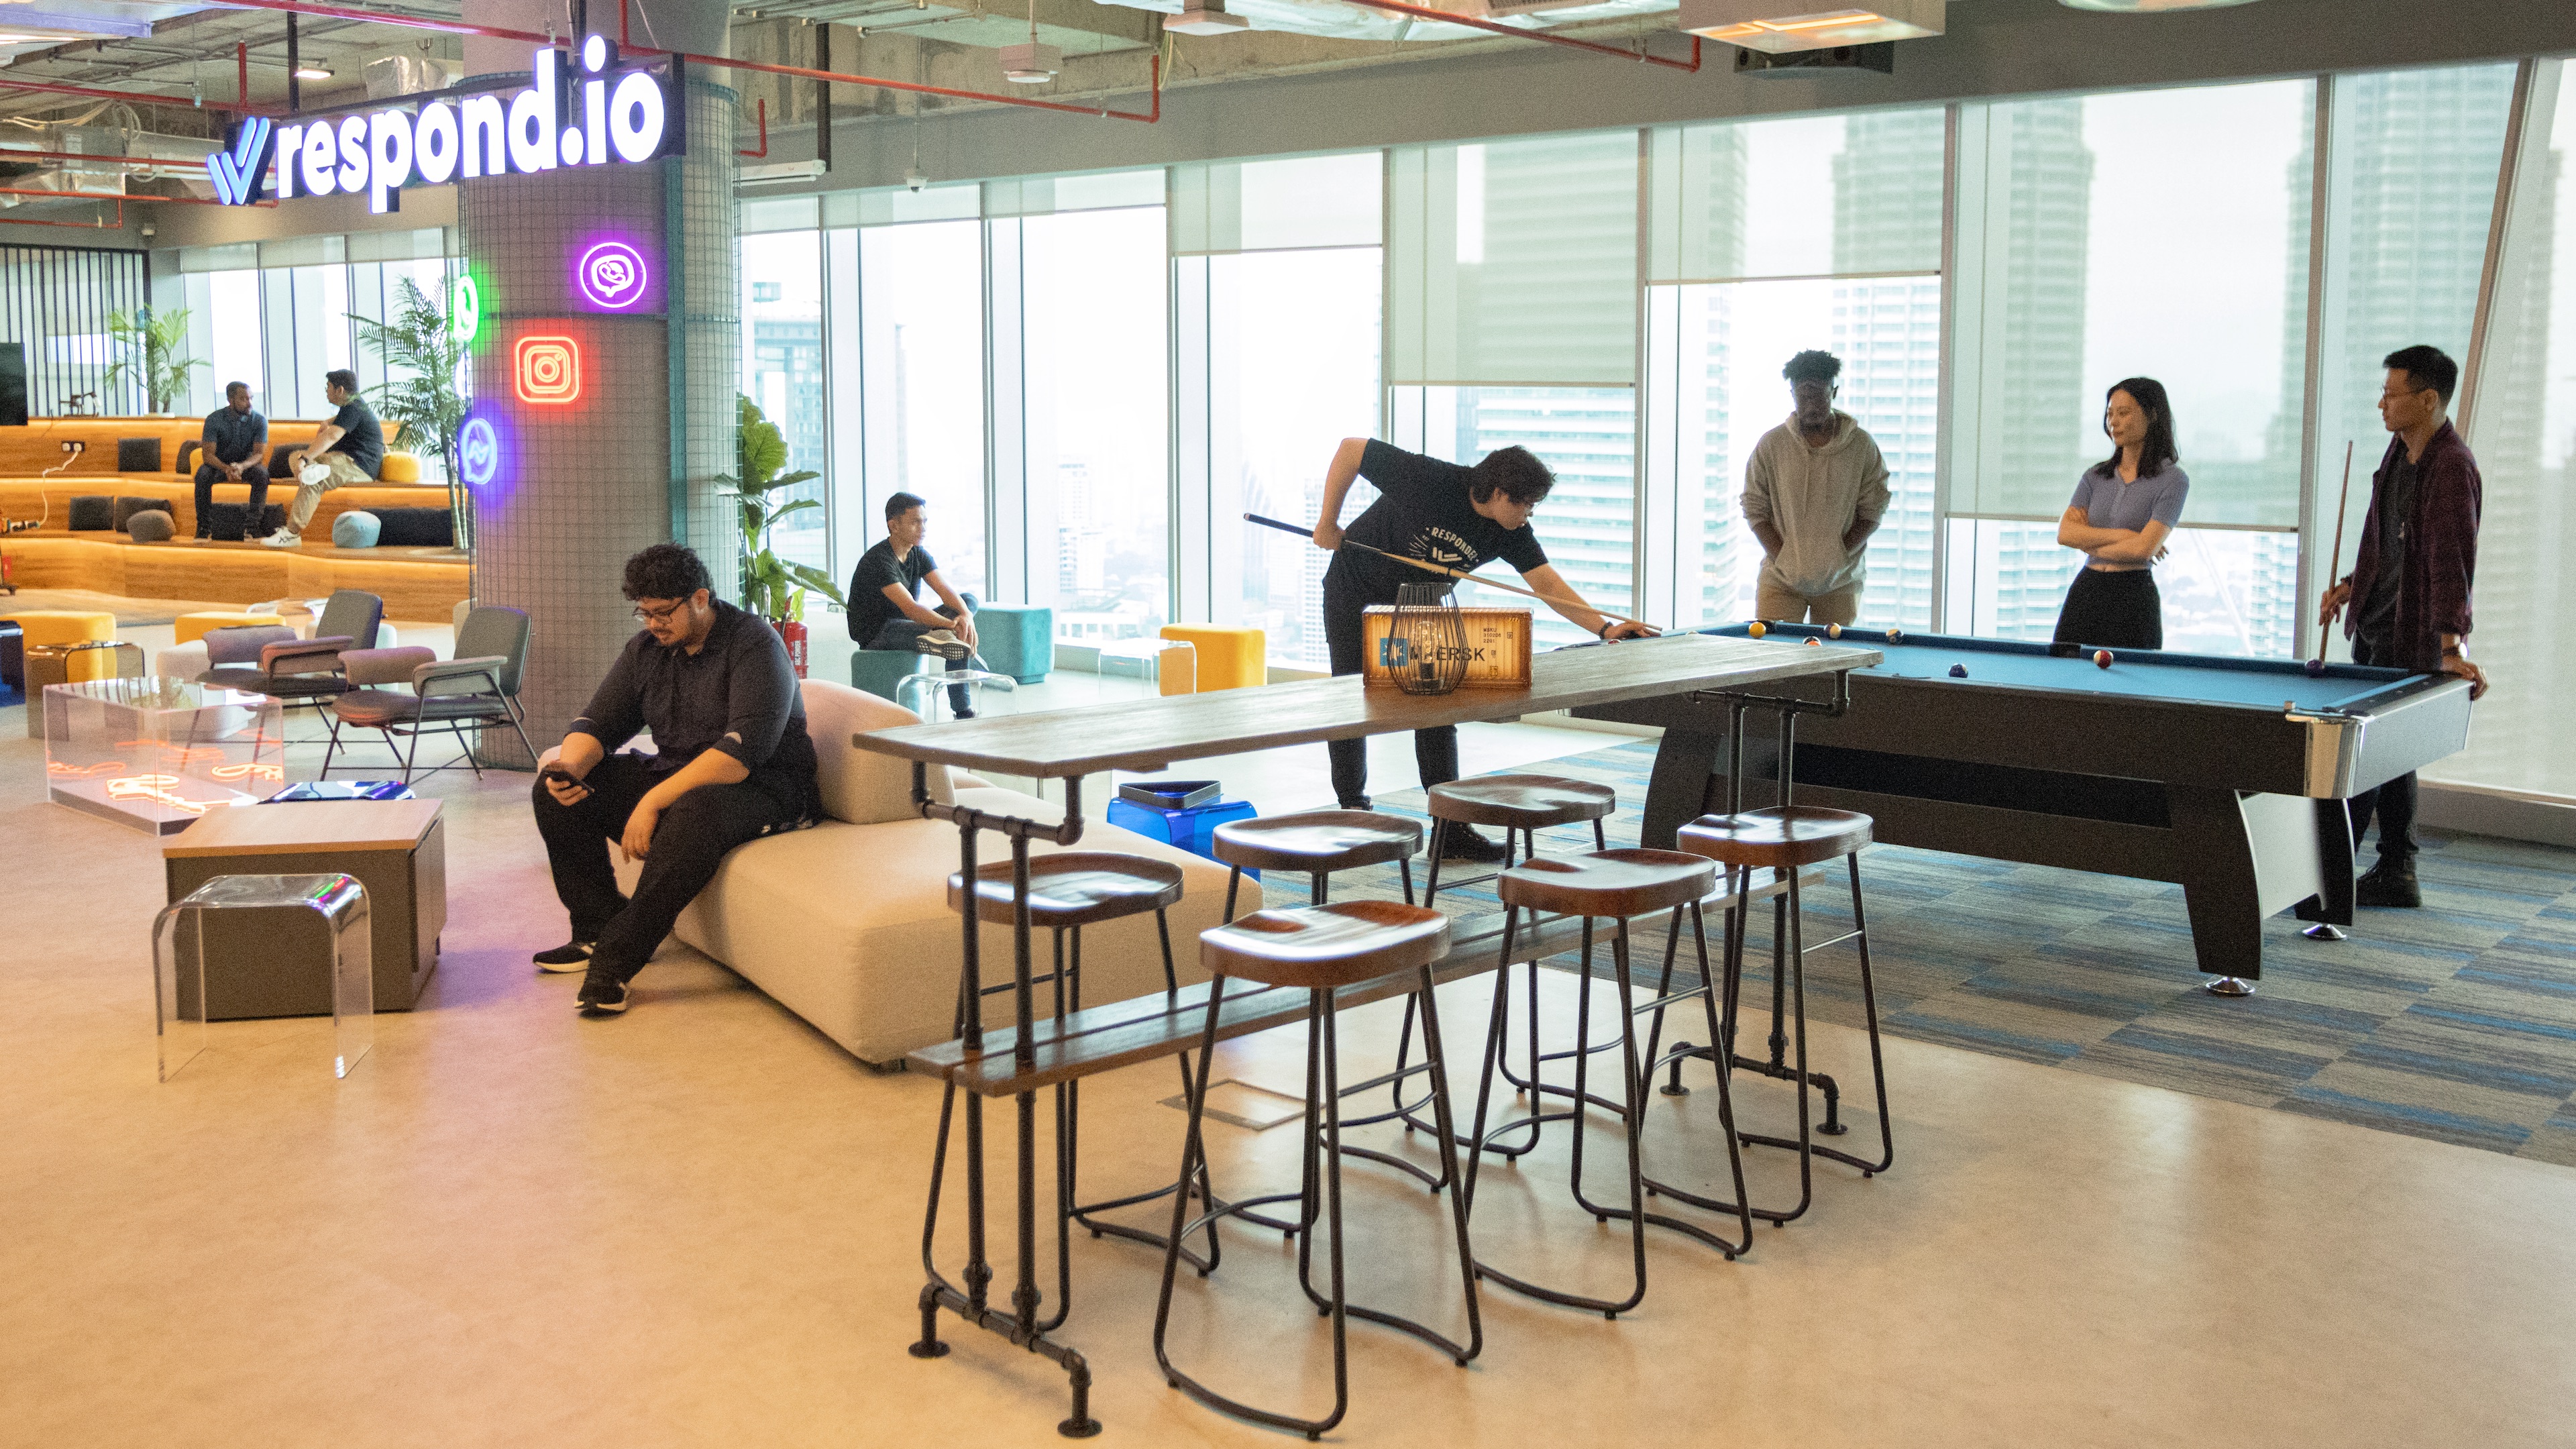 Respond.io’s new office comprises spaces for deep work, collaboration and leisure.